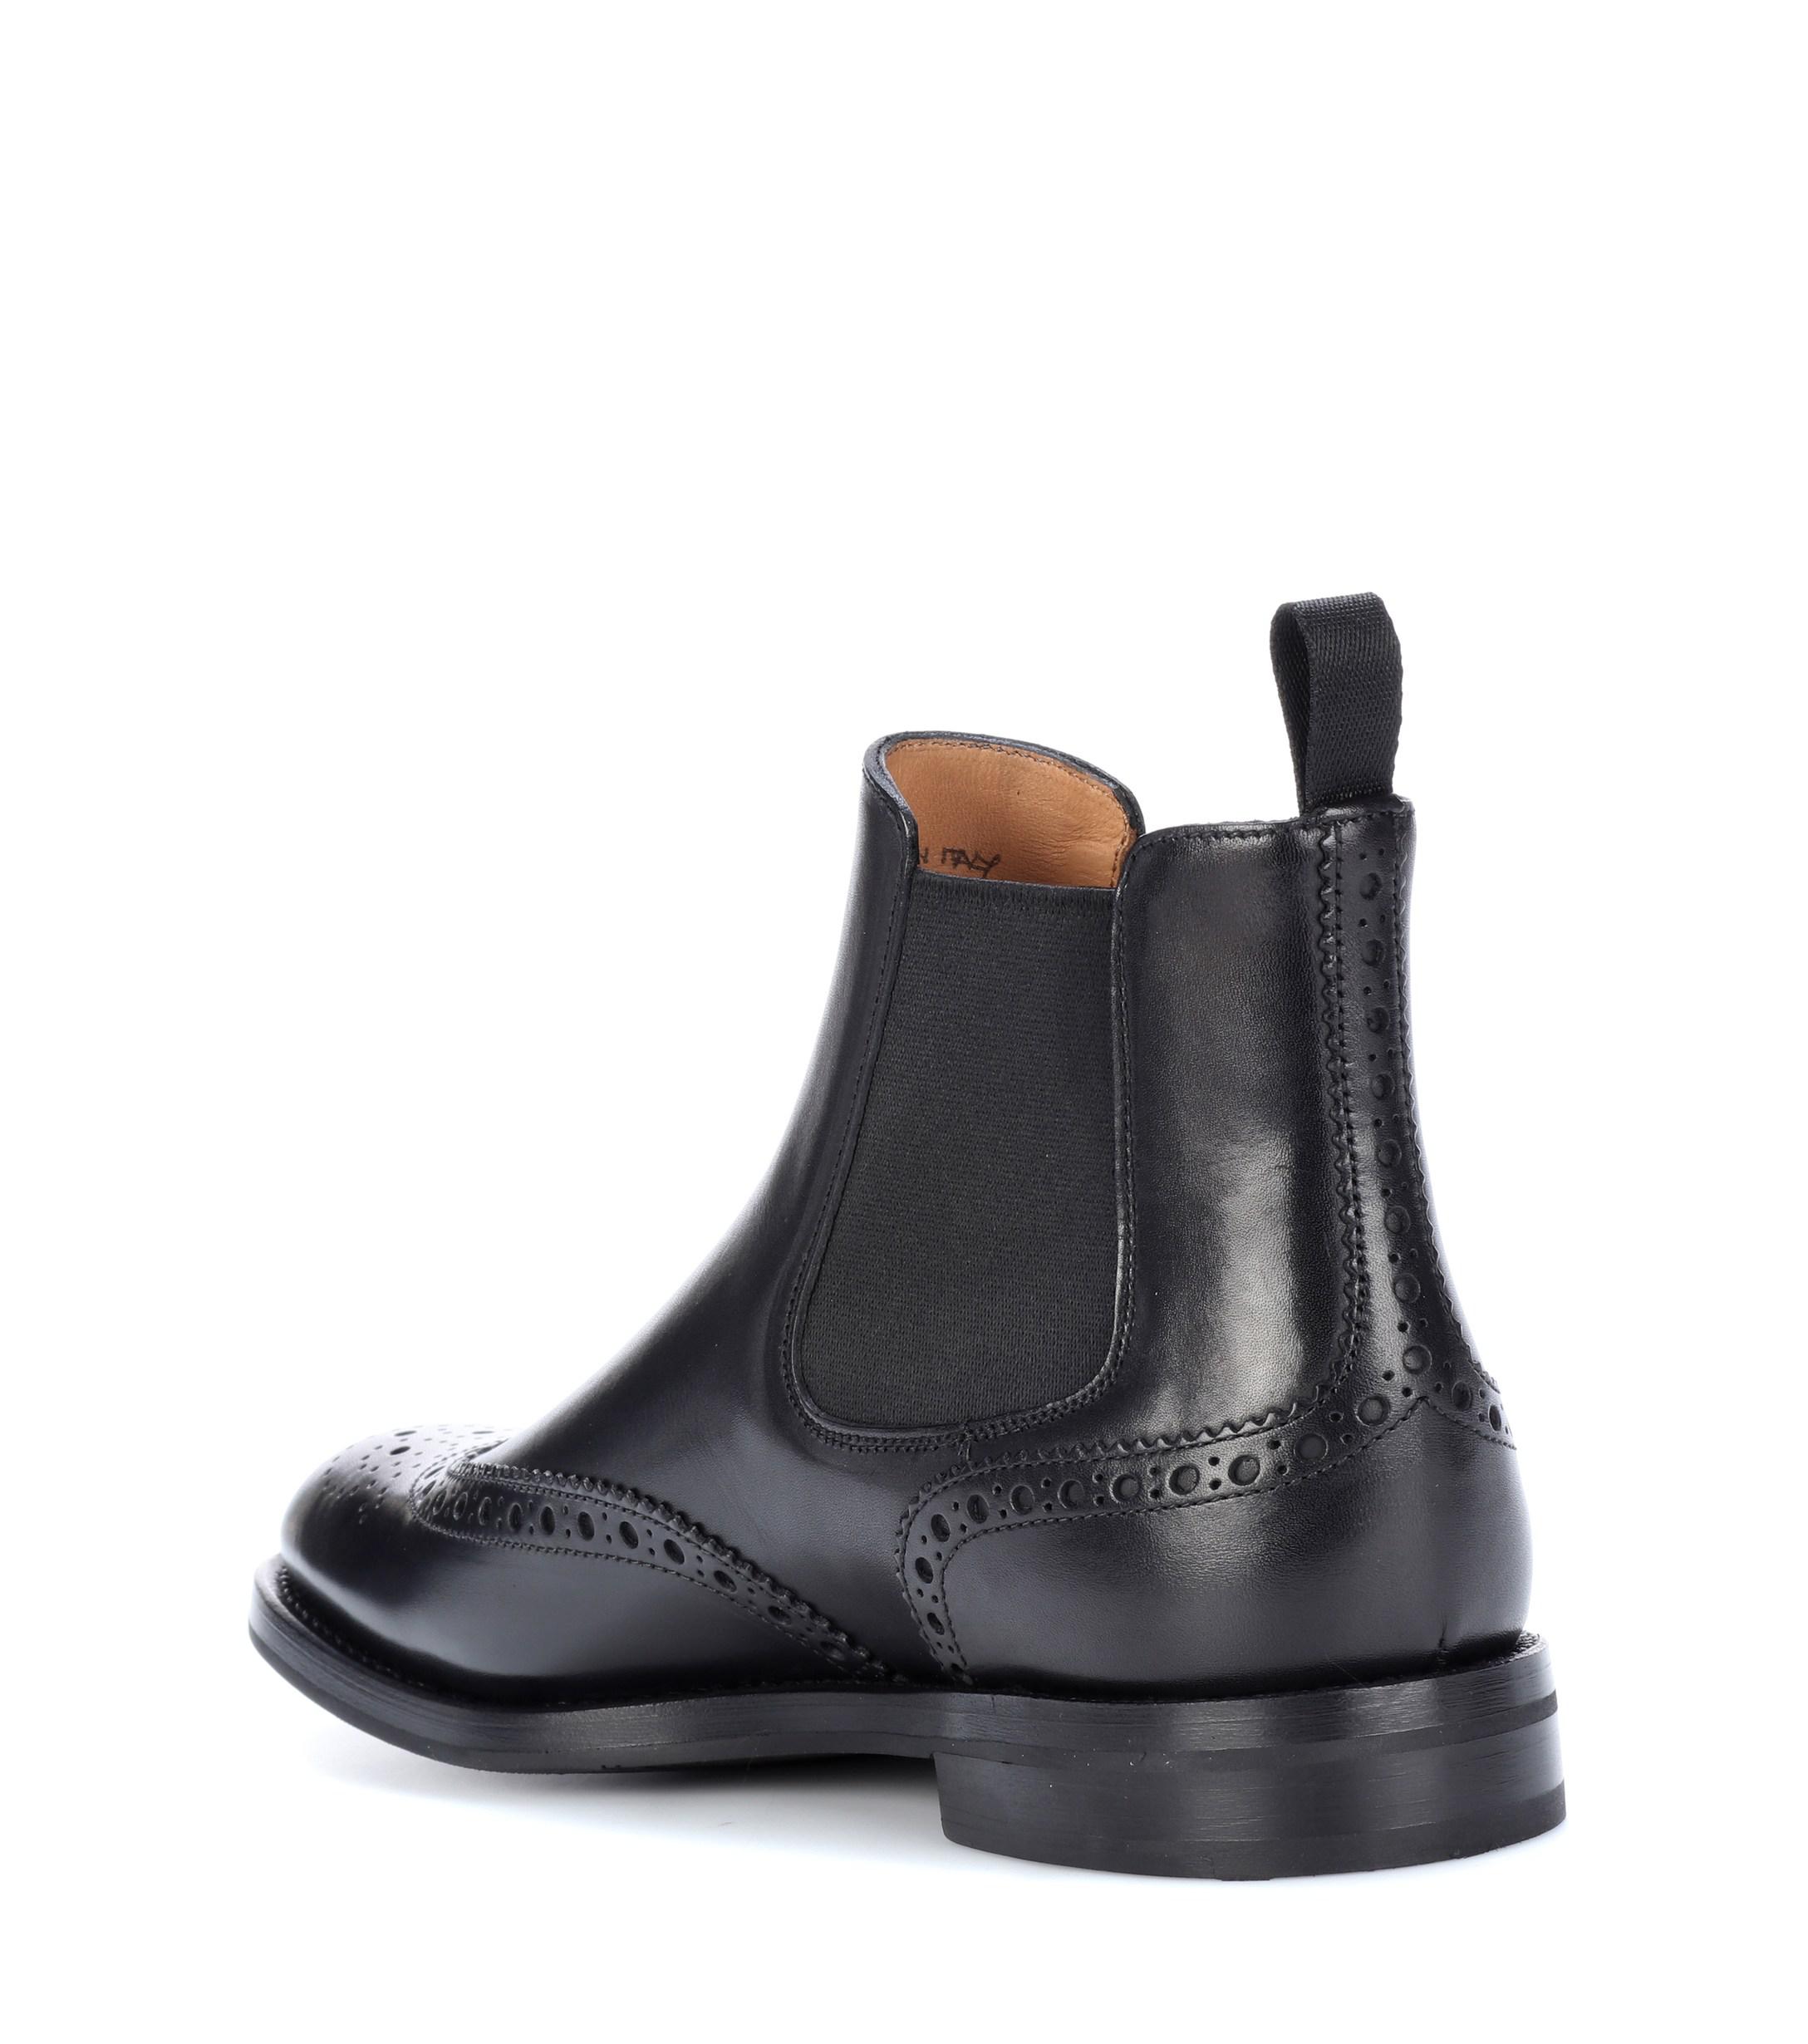 Church's Ketsby Leather Chelsea Boots in Black - Lyst